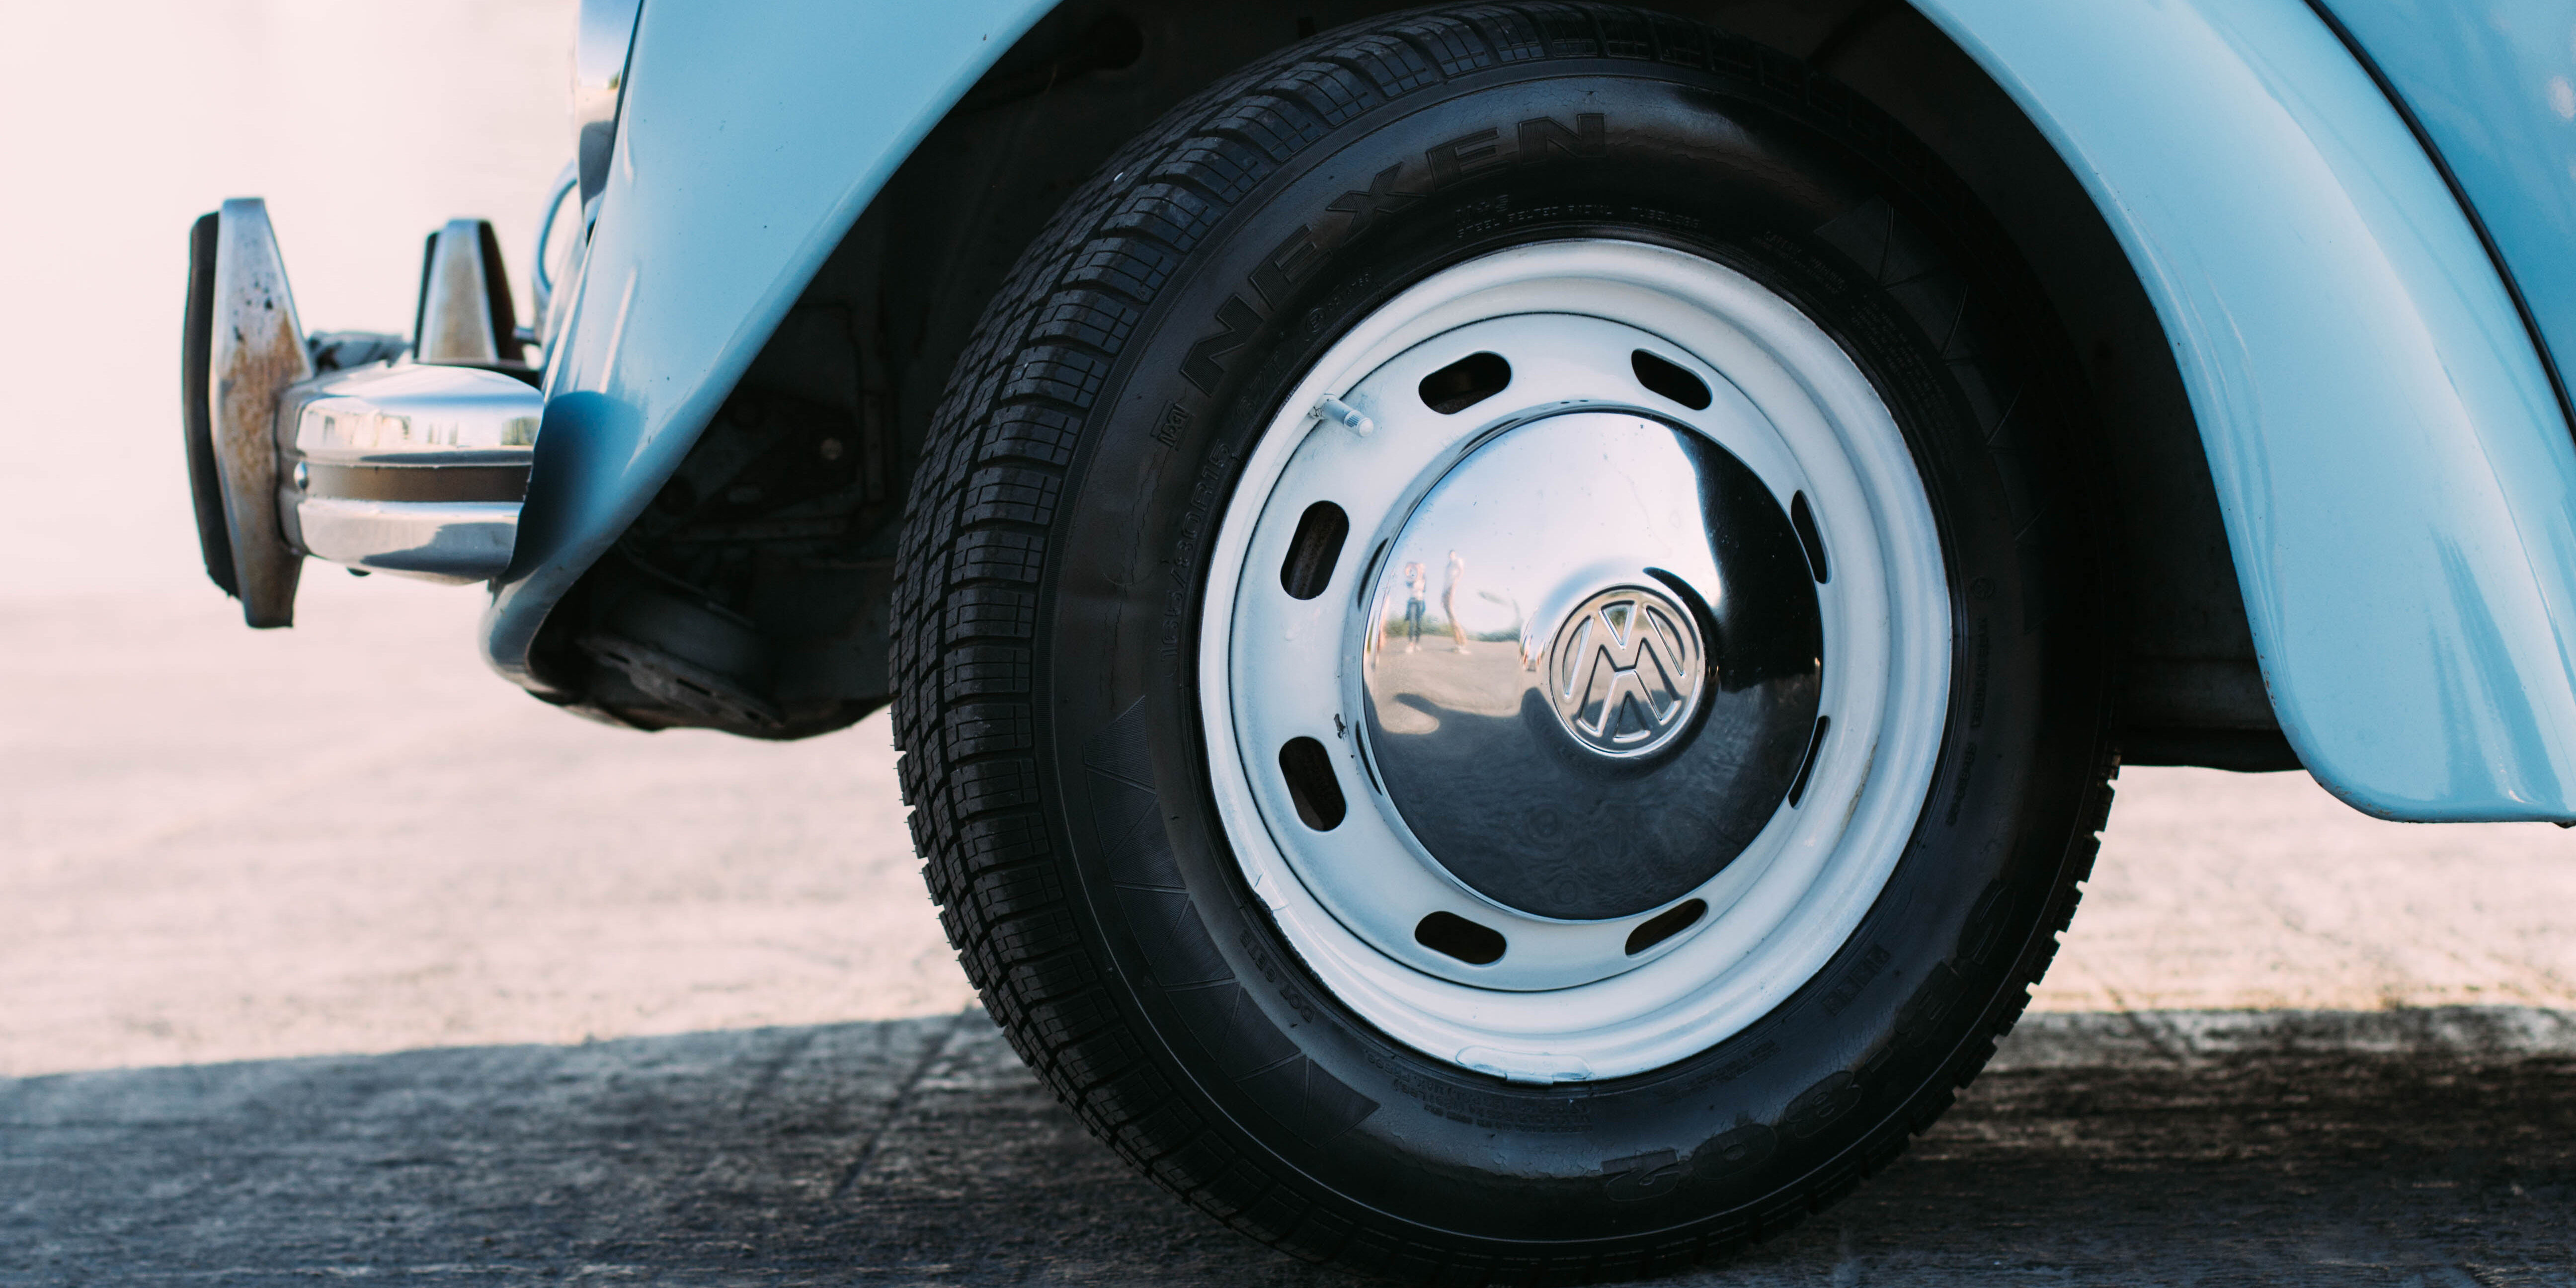 Image of blue VW tyre